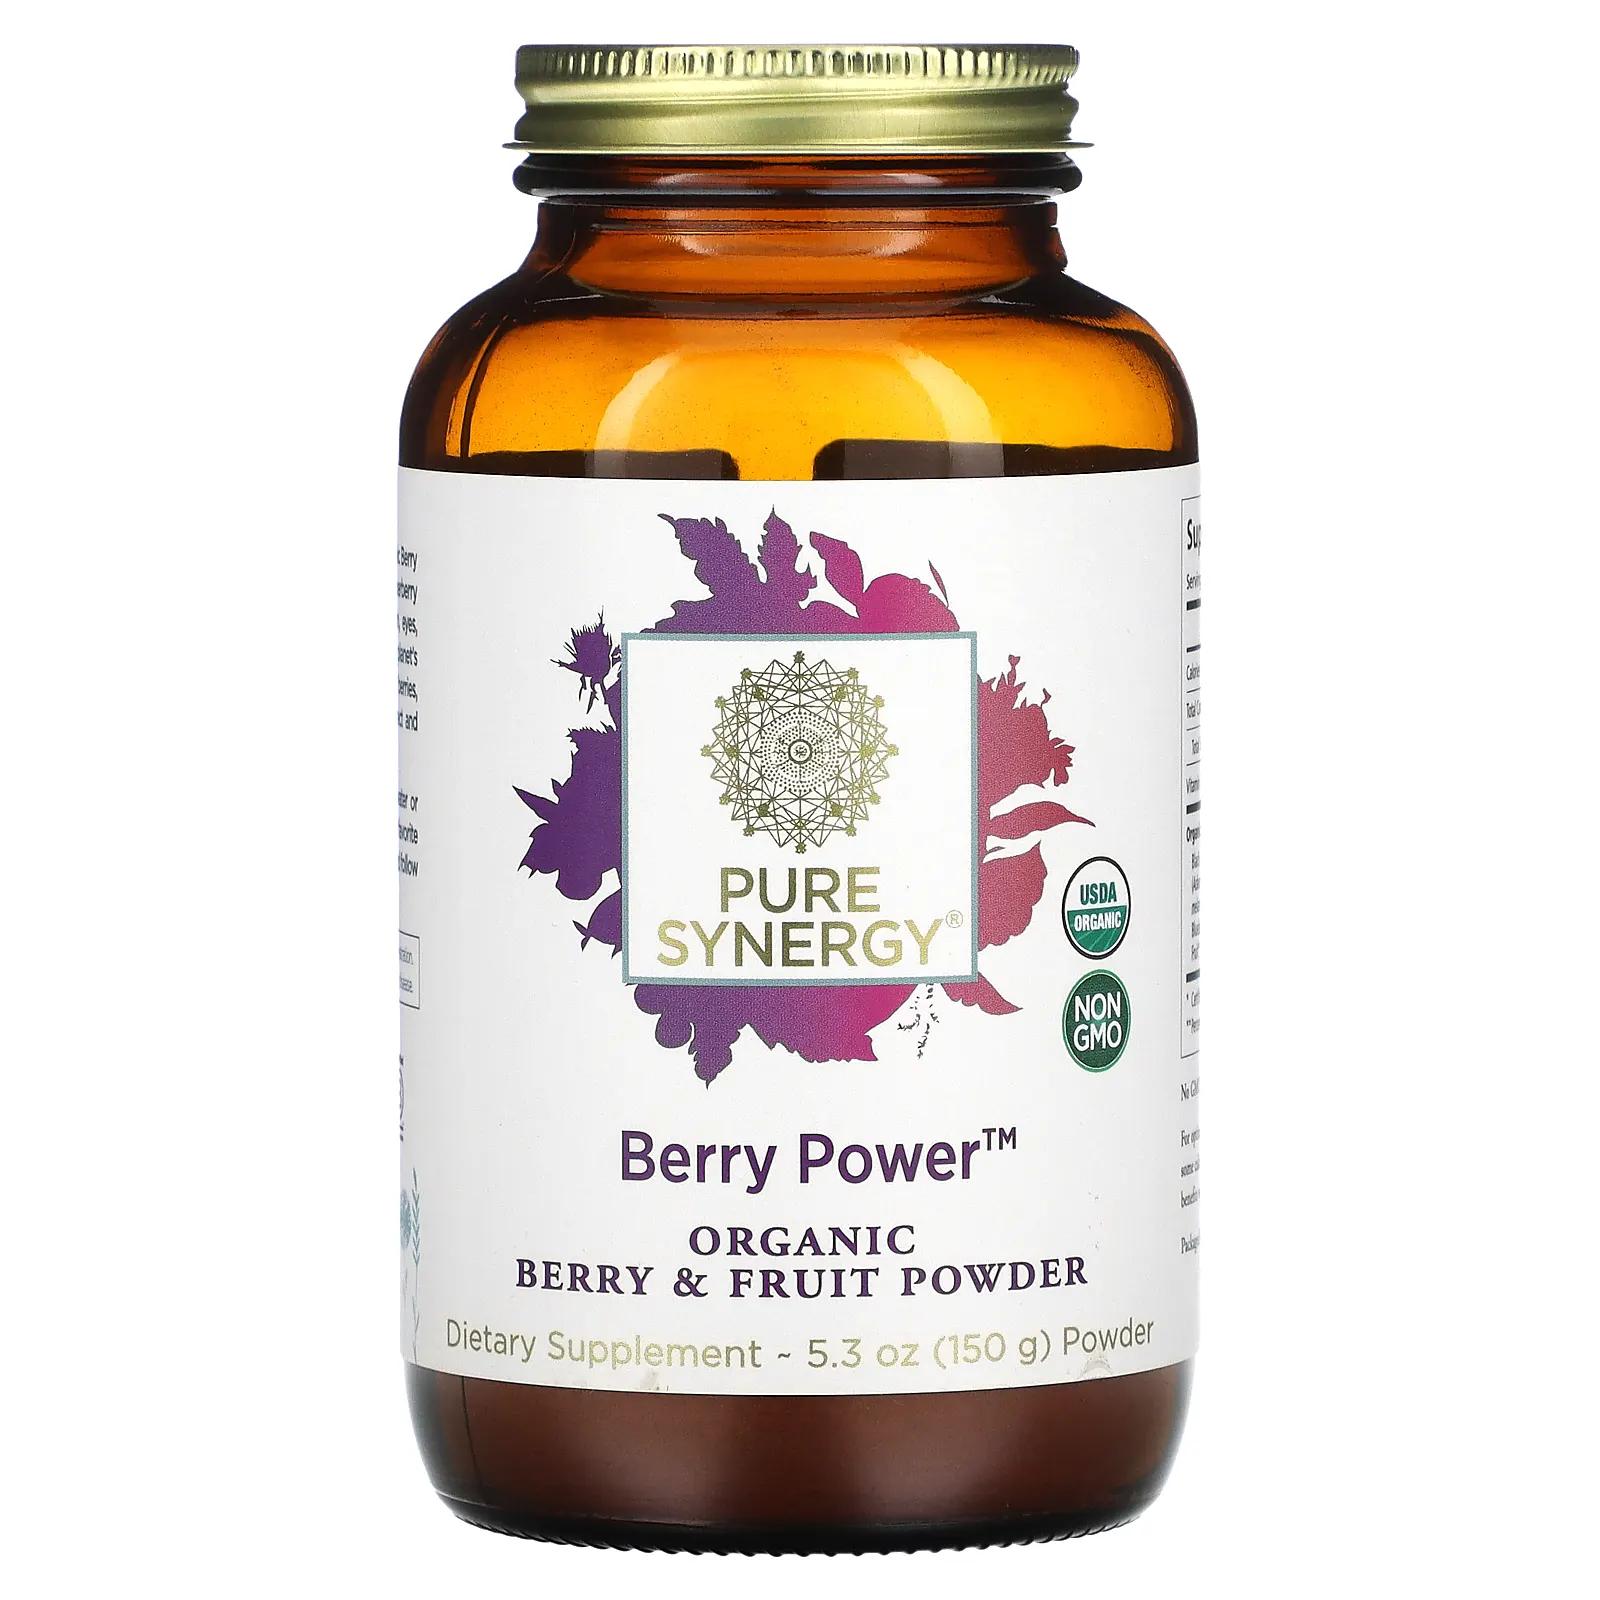 Pure Synergy Berry Power Organic Berry & Fruit Powder 5.3 oz (150 g) pure synergy the original superfood 270 капсул